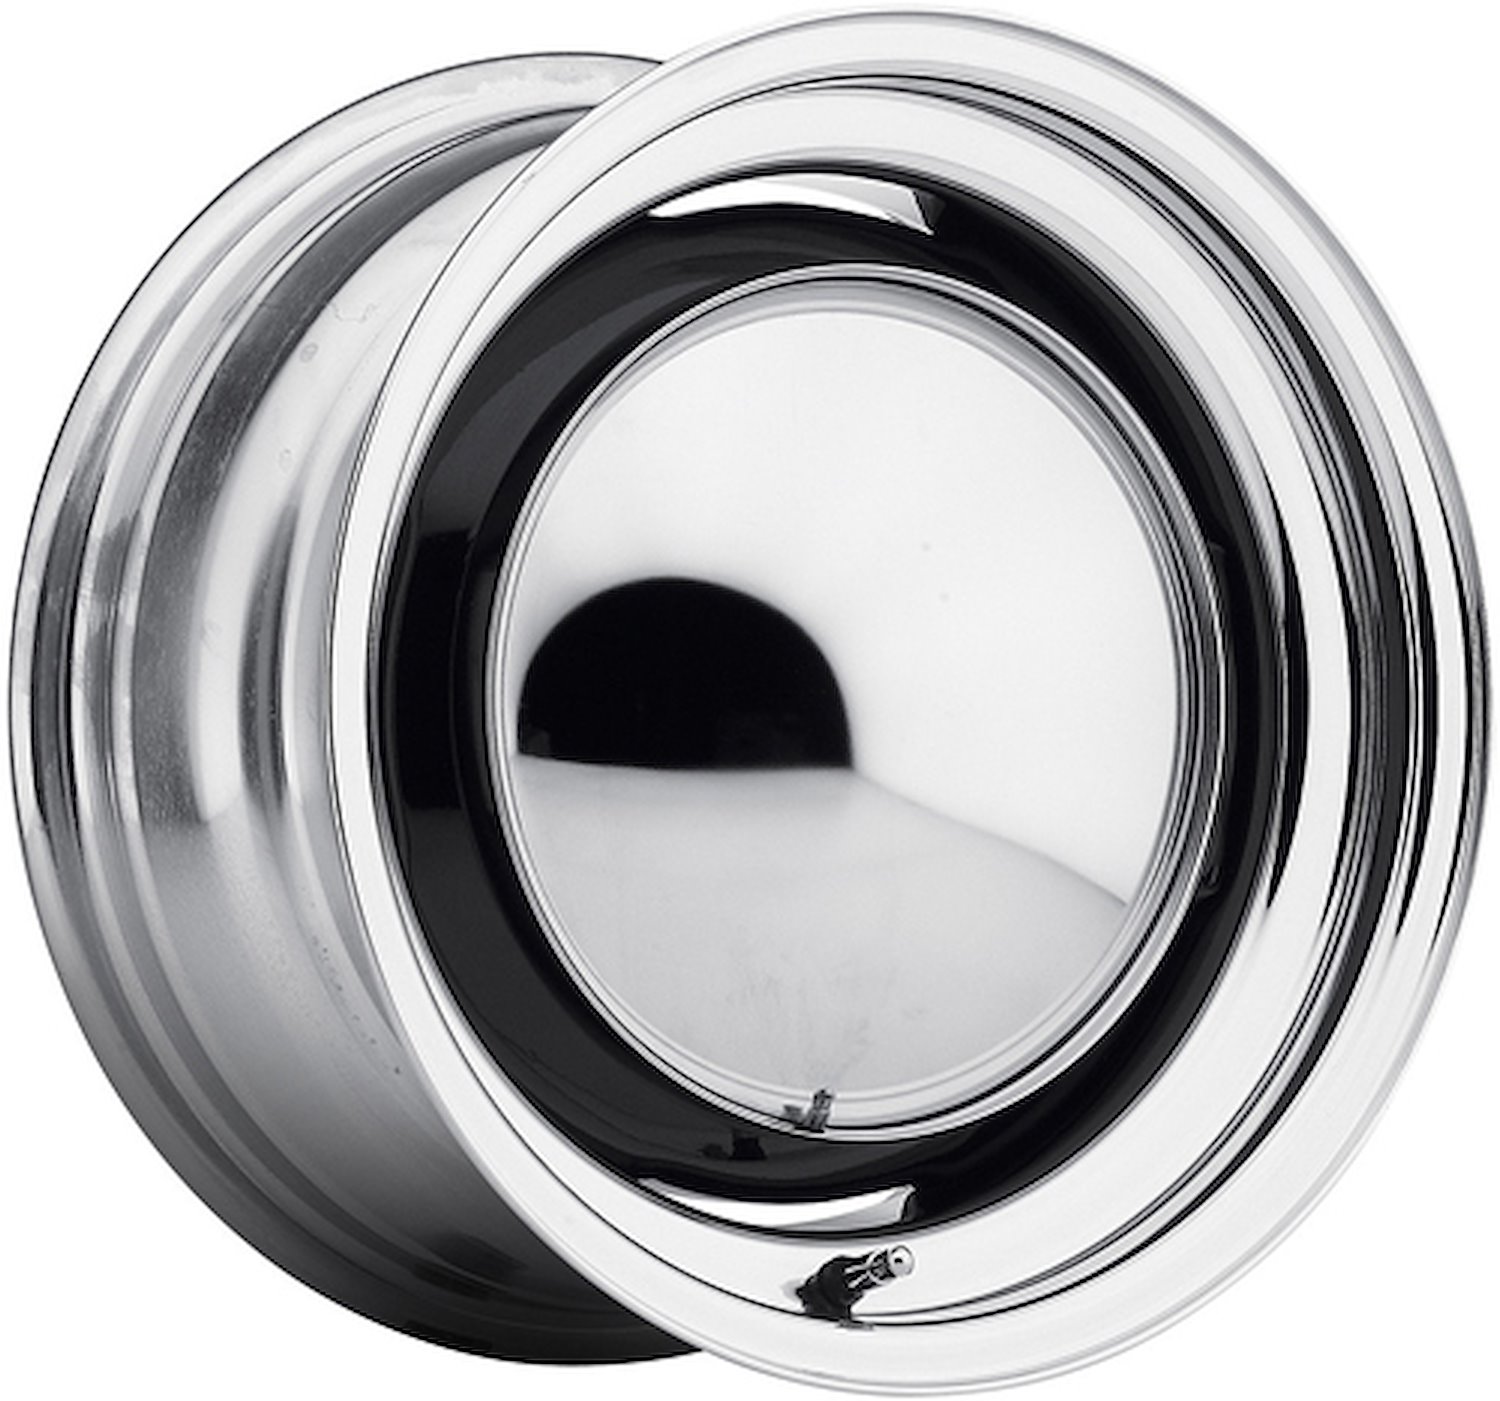 CHROME RIM & PAINT READY CENTER OEM 15 x 8 5 x 45 Bolt Circle 425 Back Spacing 6 offset 319 Center Bore 1500 lbs Load Rating